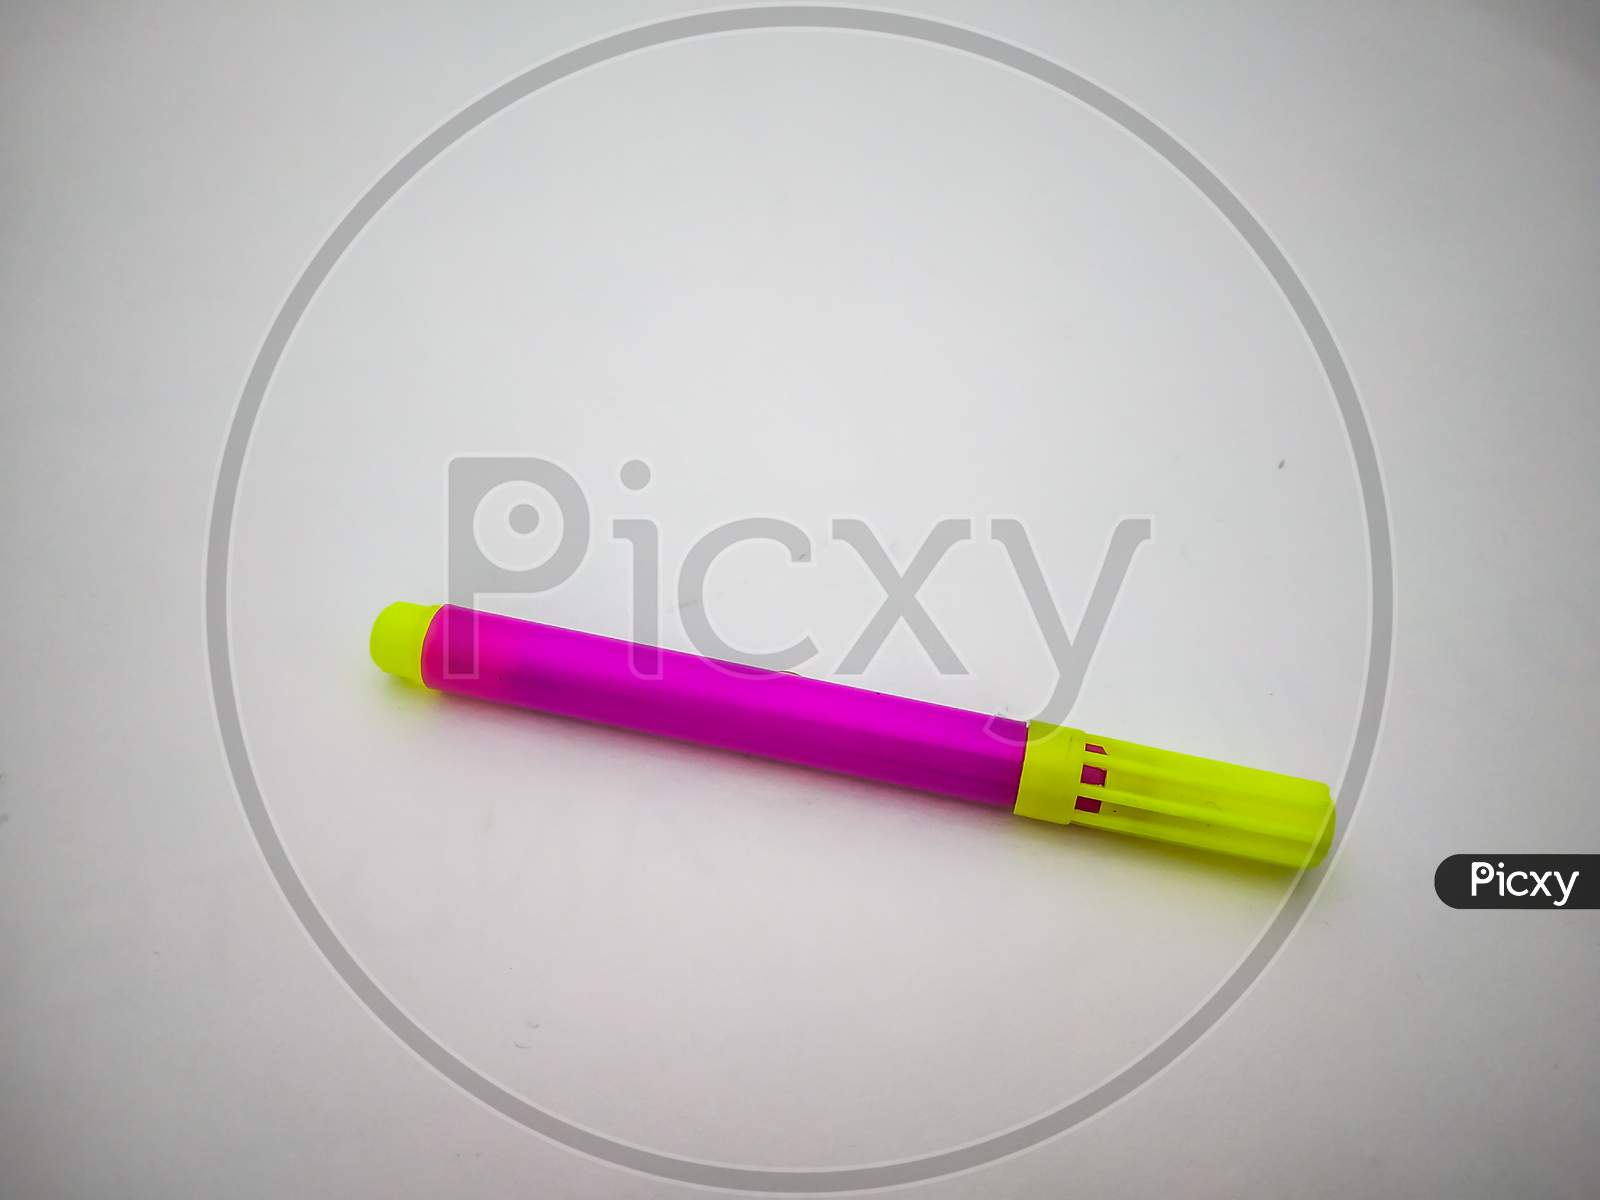 Magenta Sketch Pen Isolated With White Background.